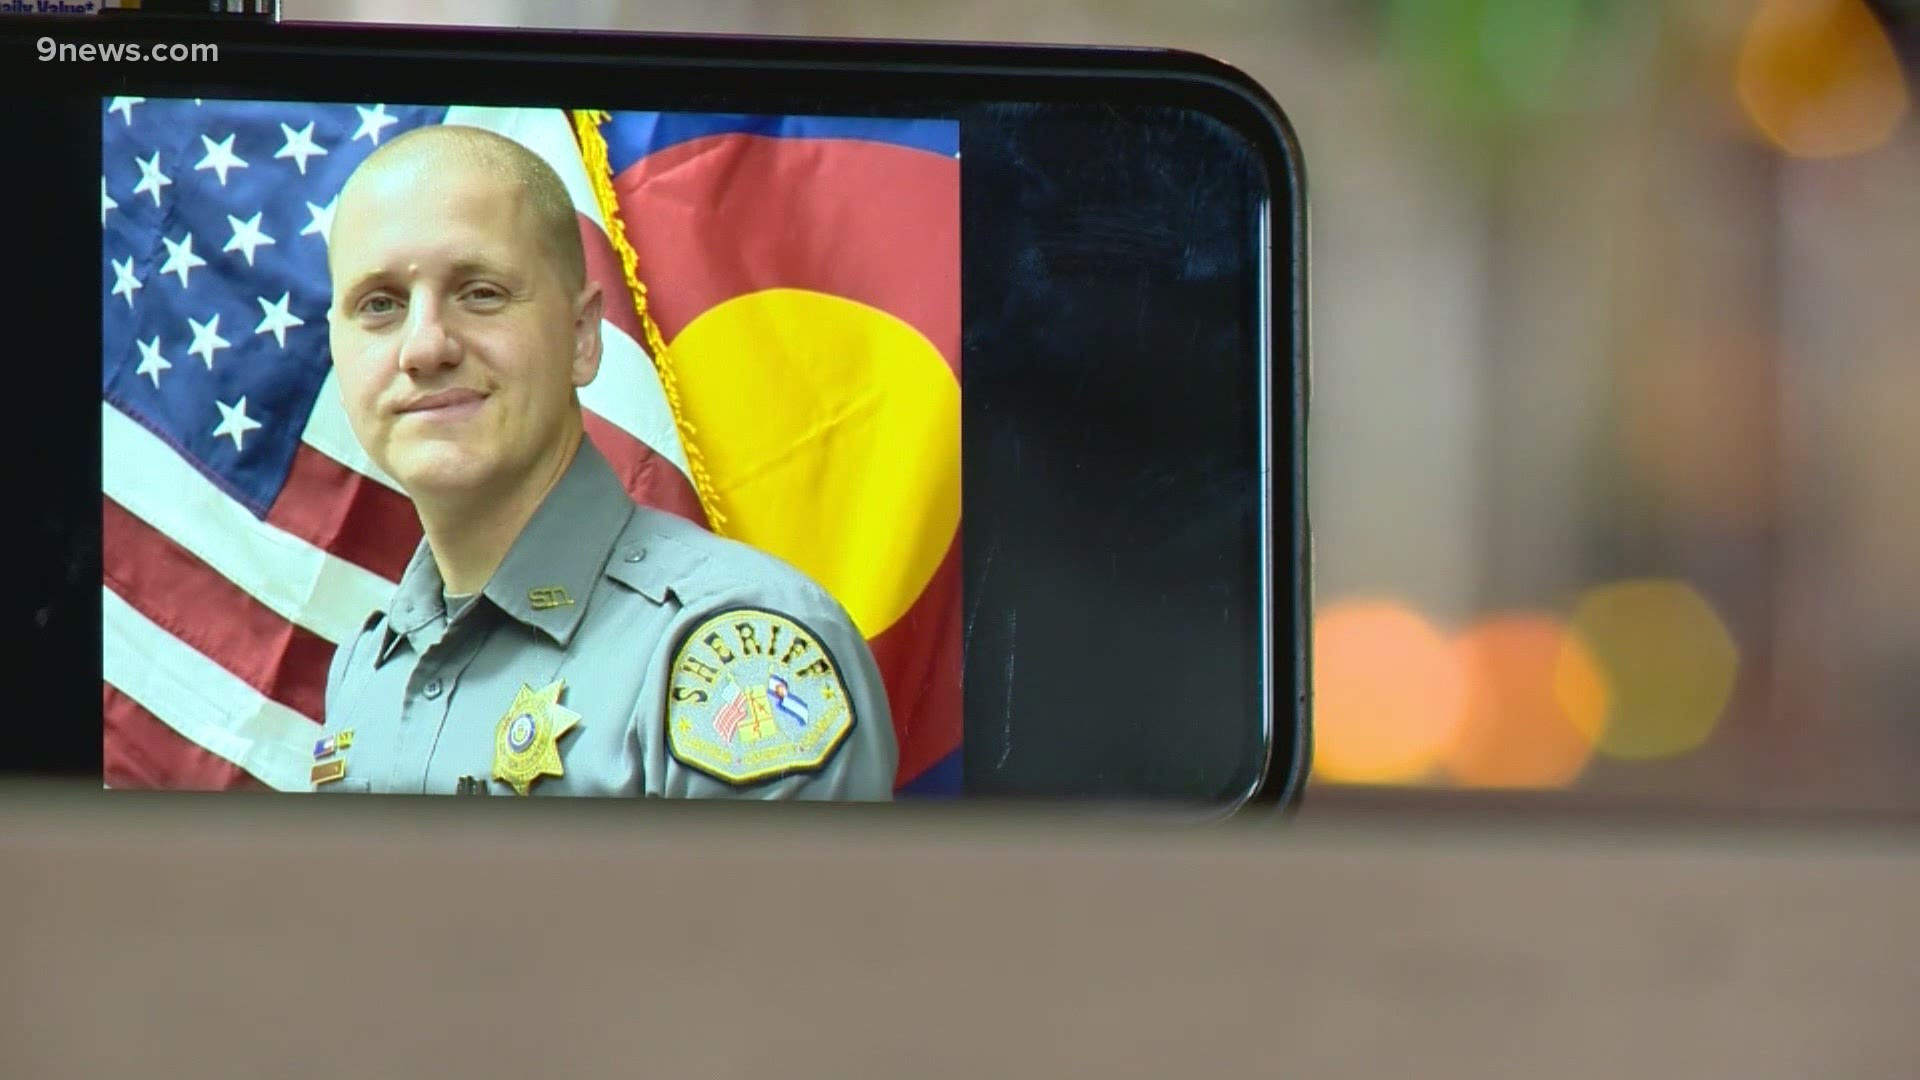 Lincoln County Sheriff's Deputy Michael Hutton is recovering after being shot multiple times early Thursday.